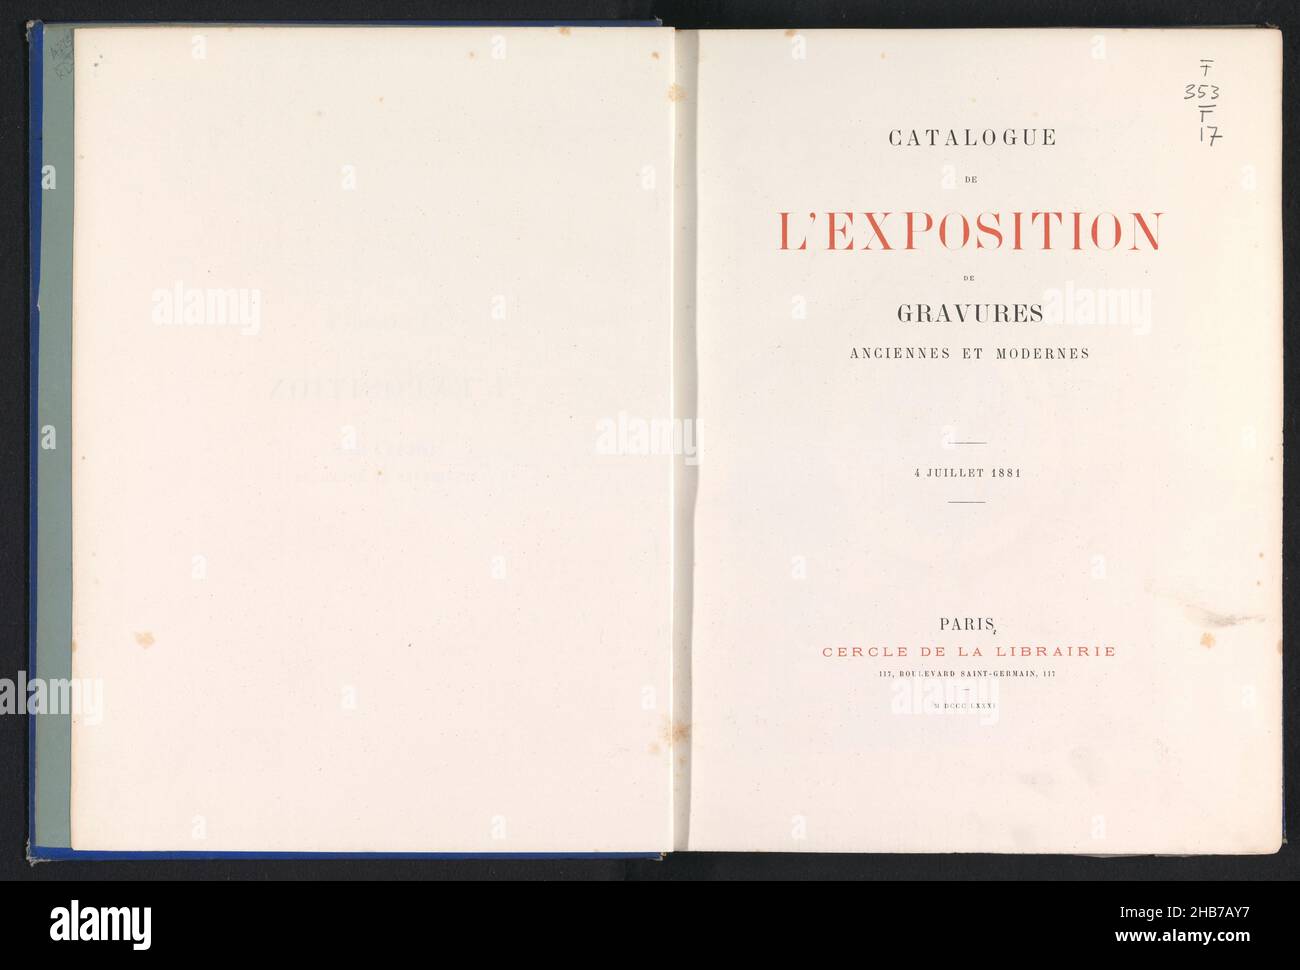 Catalogue de l'exposition de gravures anciennes et modernes, publisher: Cercle de la librairie, (mentioned on object), Paris, 1881, cardboard, paper, printing, collotype, engraving, collotype, height 324 mm × width 251 mm × thickness 40 mm Stock Photo